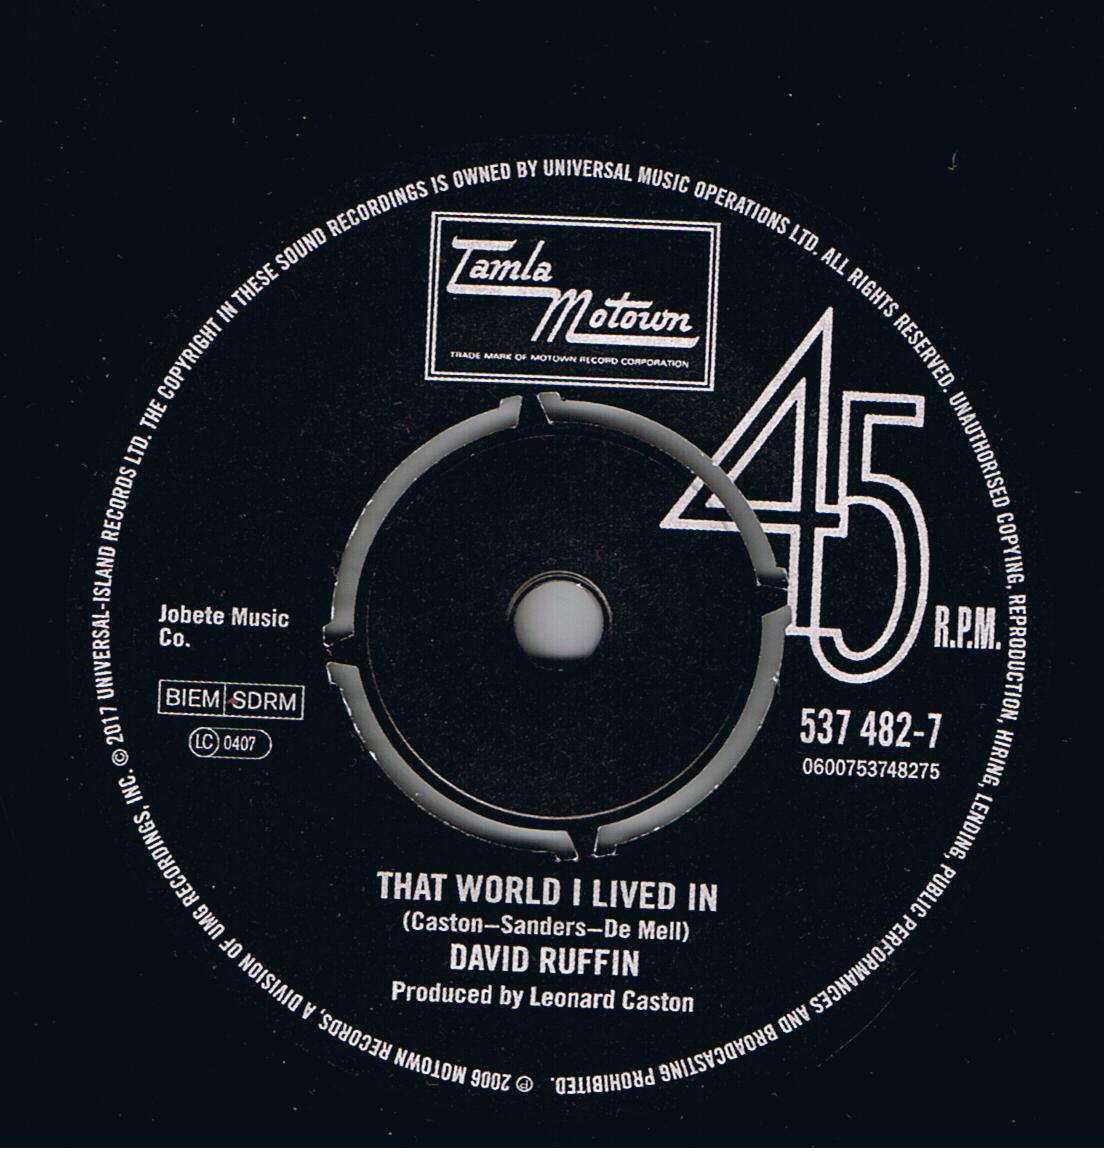 David Ruffin - That World I Lived In / Rita Wright - Since You Came Back (7")